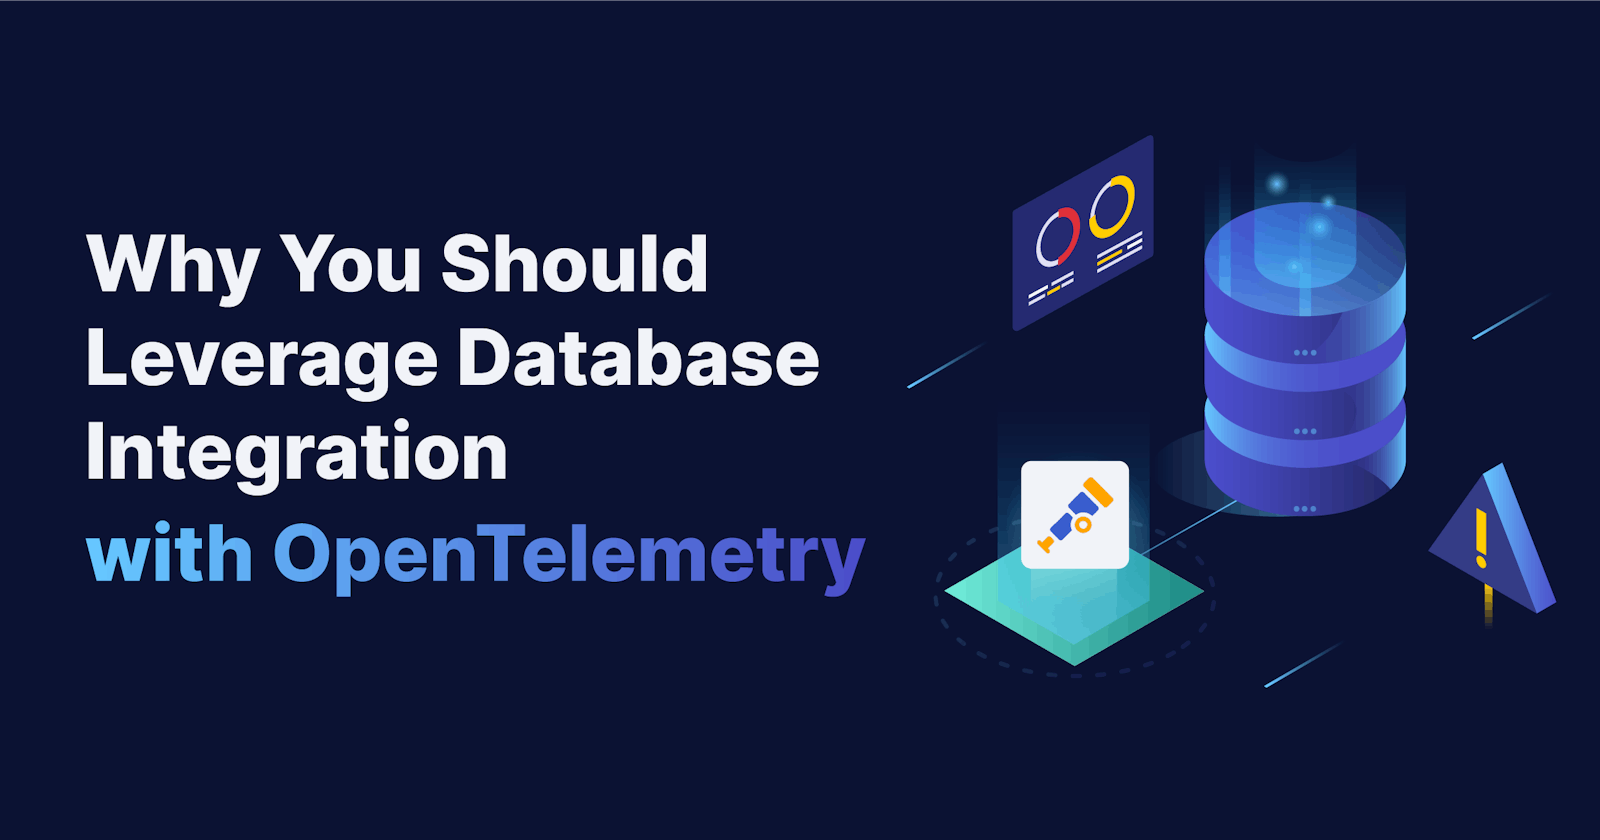 Why You Should Leverage Database Integration with OpenTelemetry